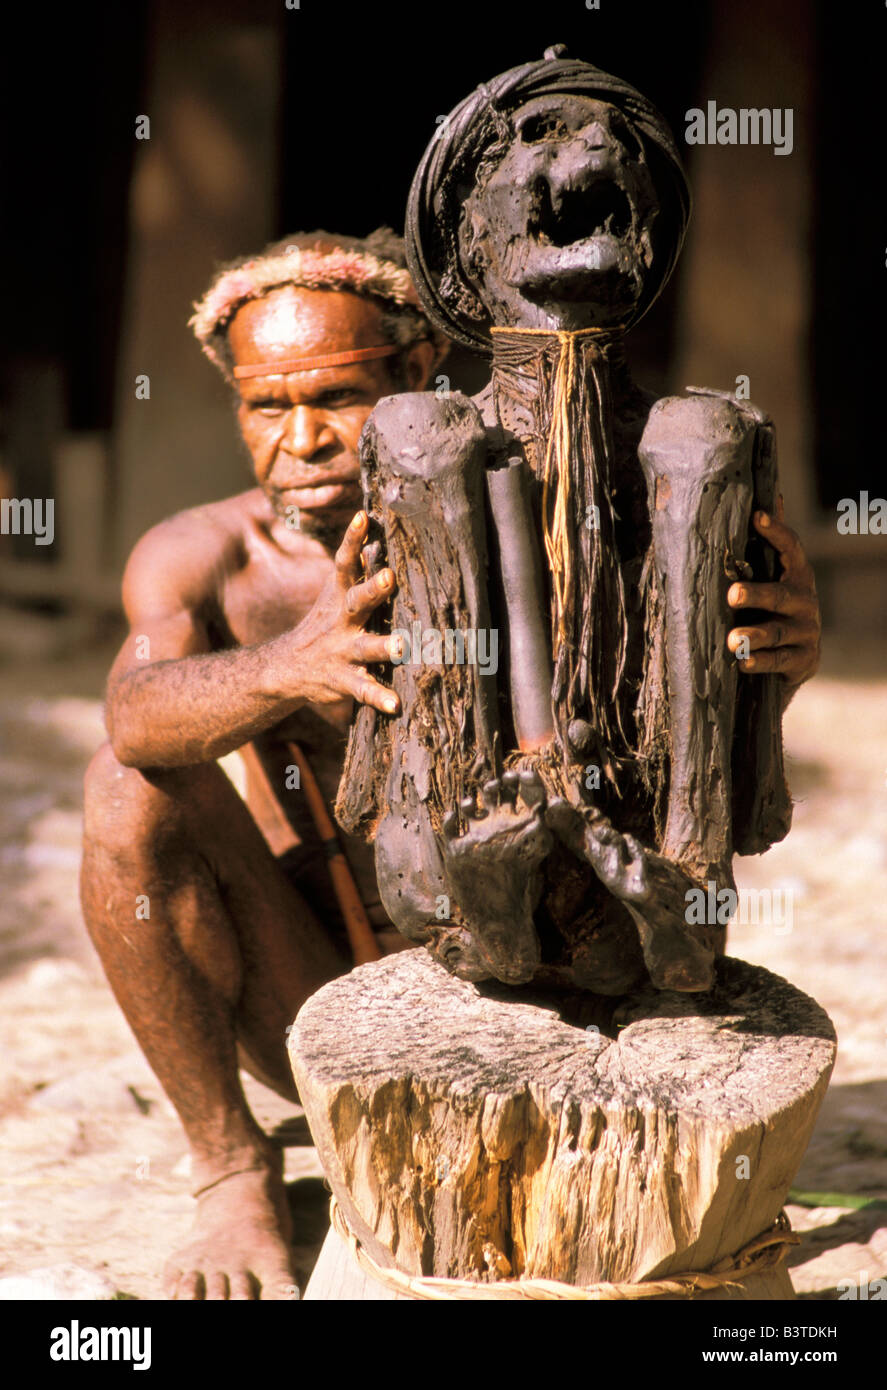 Oceania, Indonesia, Irian Jaya. The Dani people, a perserved 300 year old chief. Stock Photo